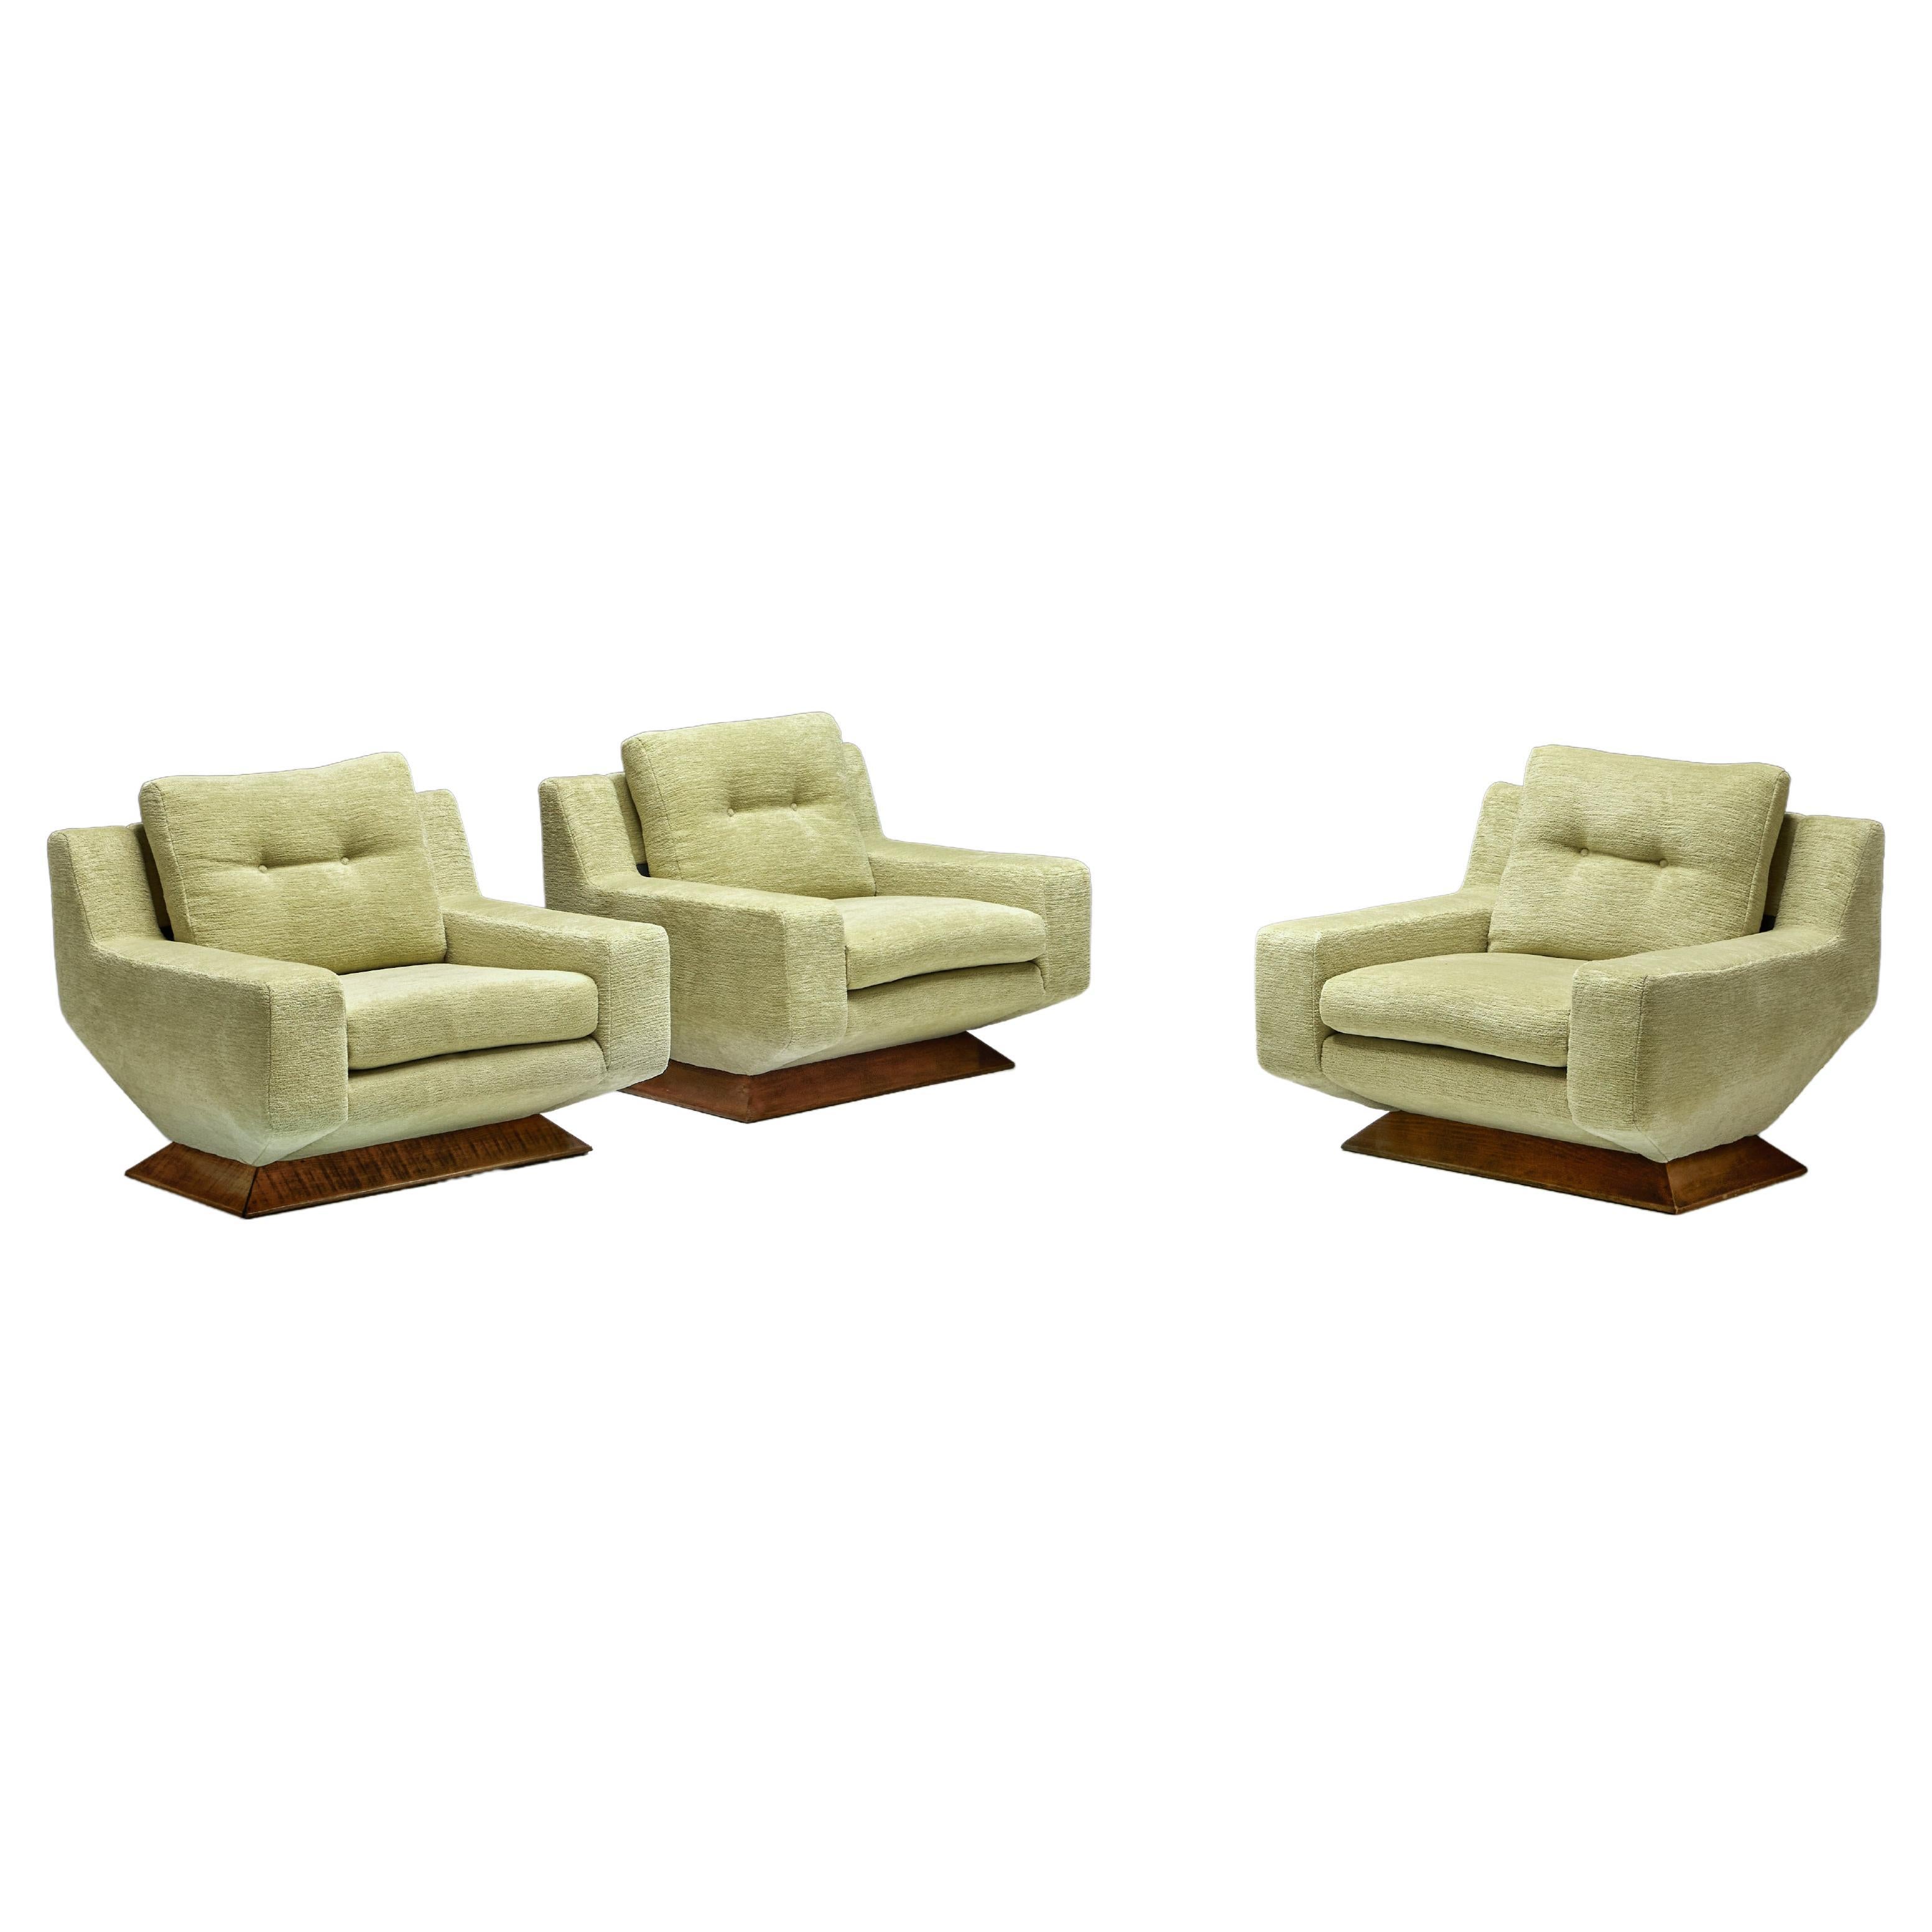 Mid-Century Club Chairs in Pierre Frey Chenille, Italy, 1960s